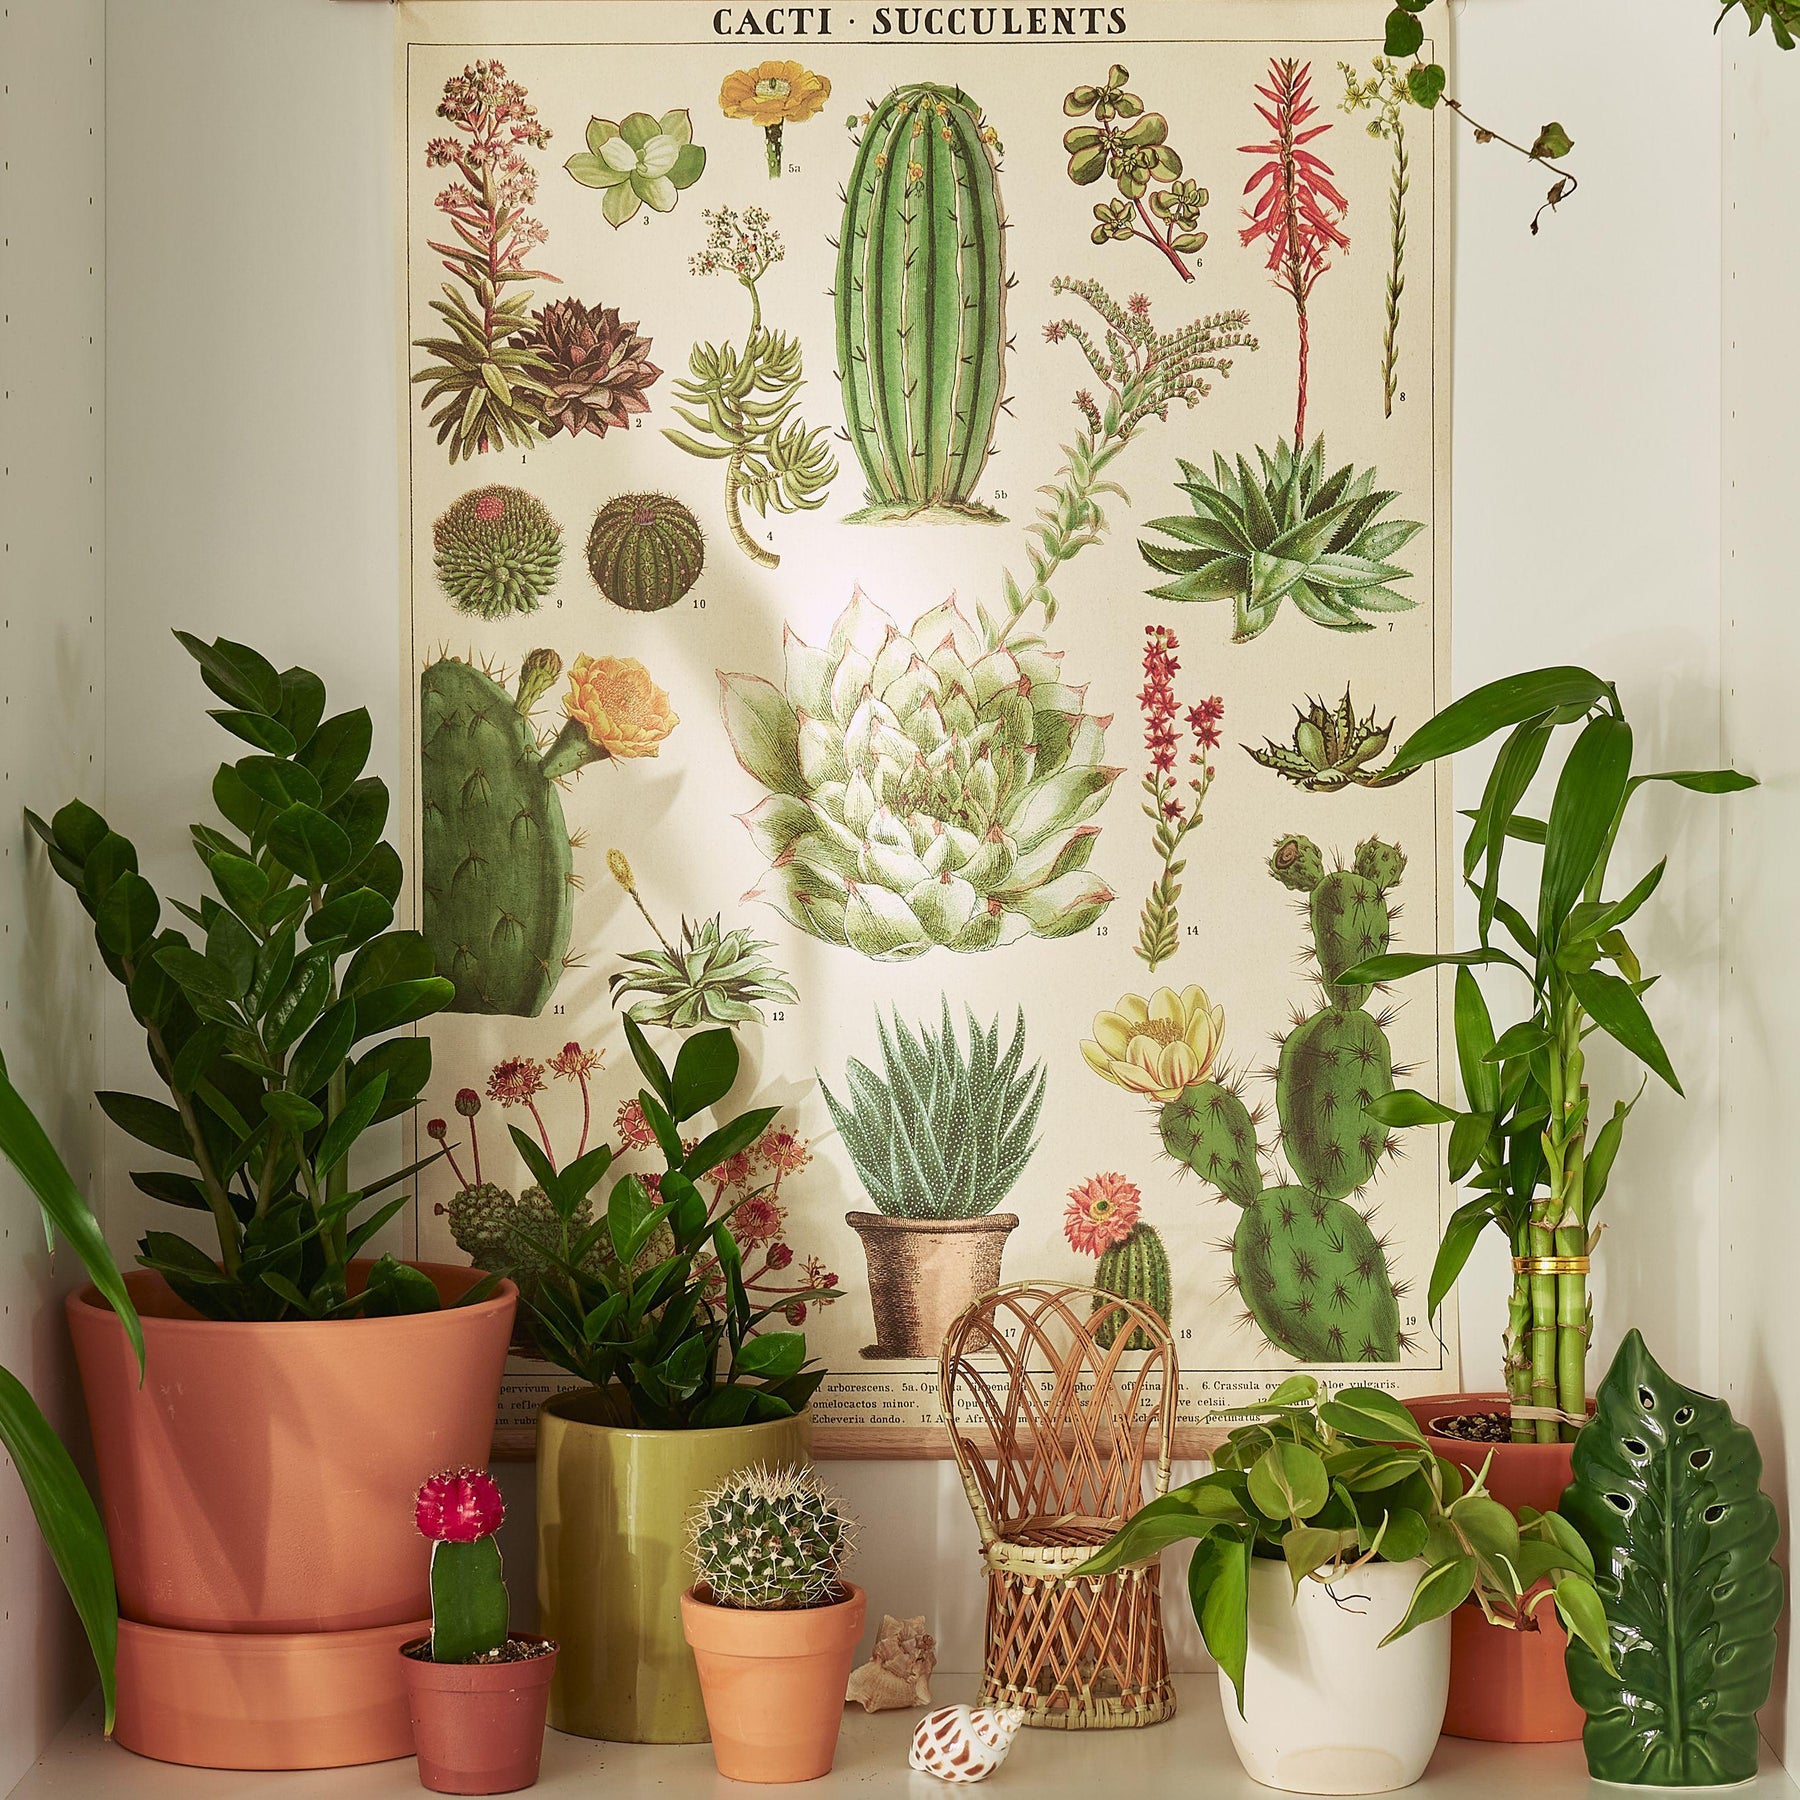 Houseplants that Thrive in the Dark.